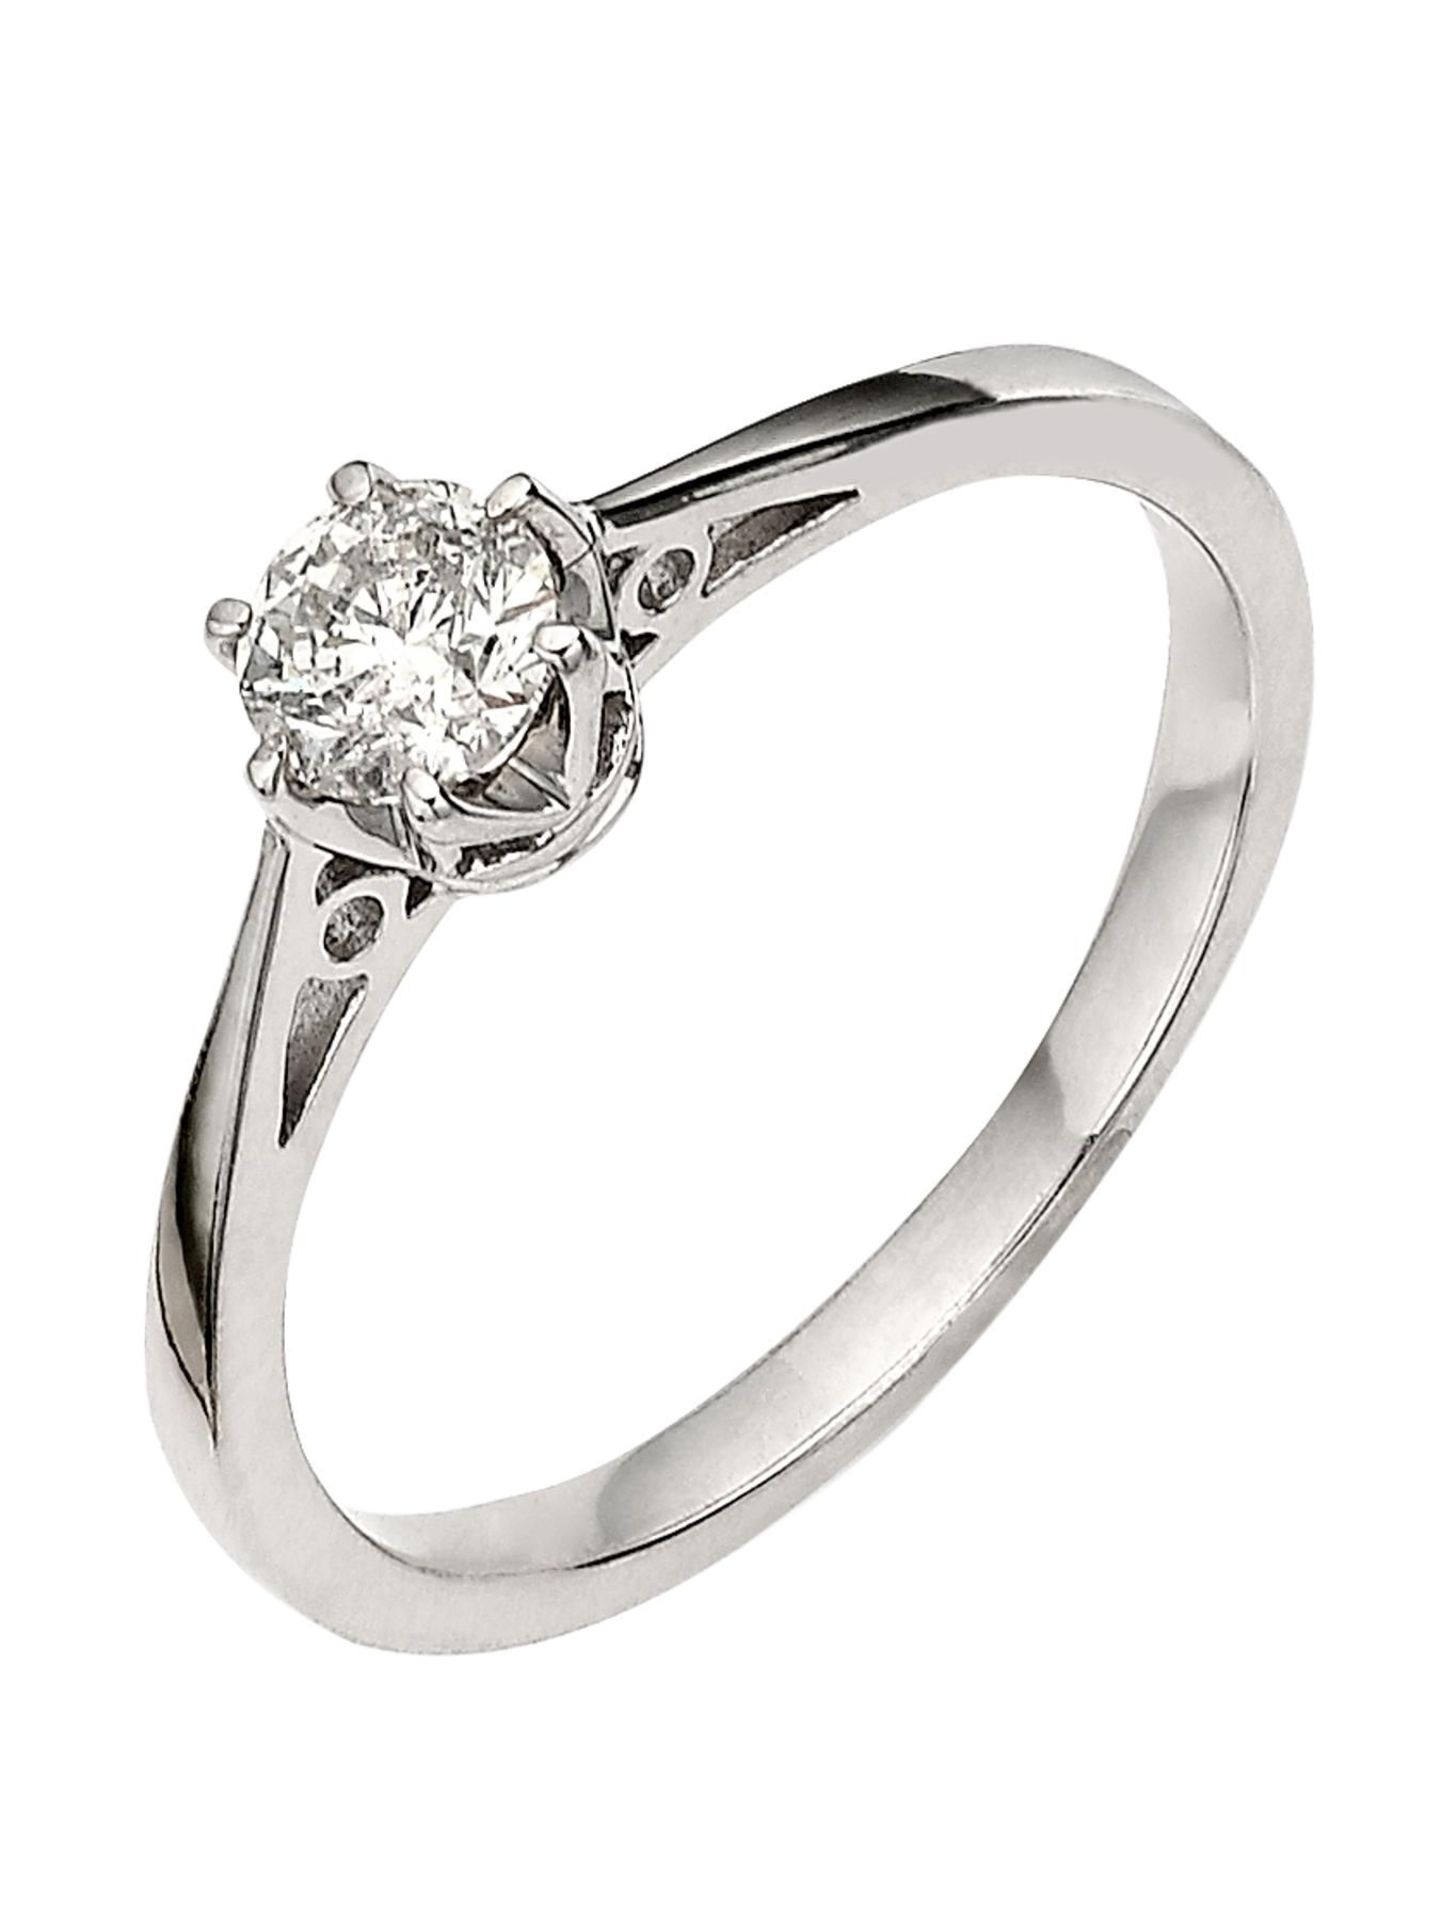 Diamond Solitaire Engagement Ring, Metal 9ct White Gold, Weight 2.16, Diamond Weight (ct) 0.16,